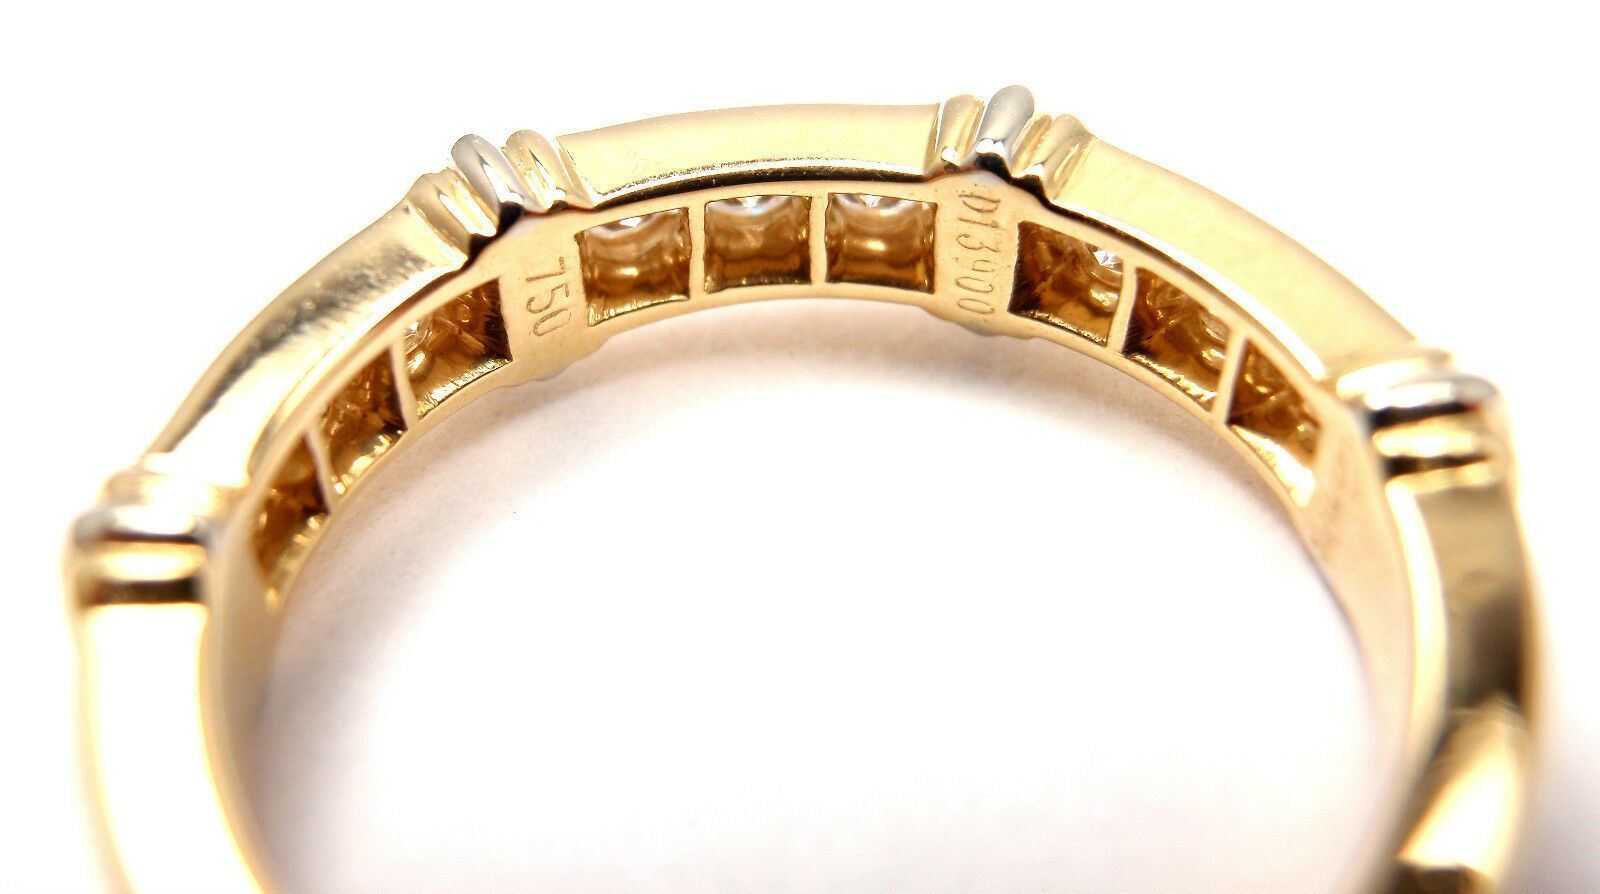 Cartier Jewelry & Watches:Fine Jewelry:Rings Authentic! Cartier 18k Yellow Gold Diamond Band Ring Size 48 Us 5